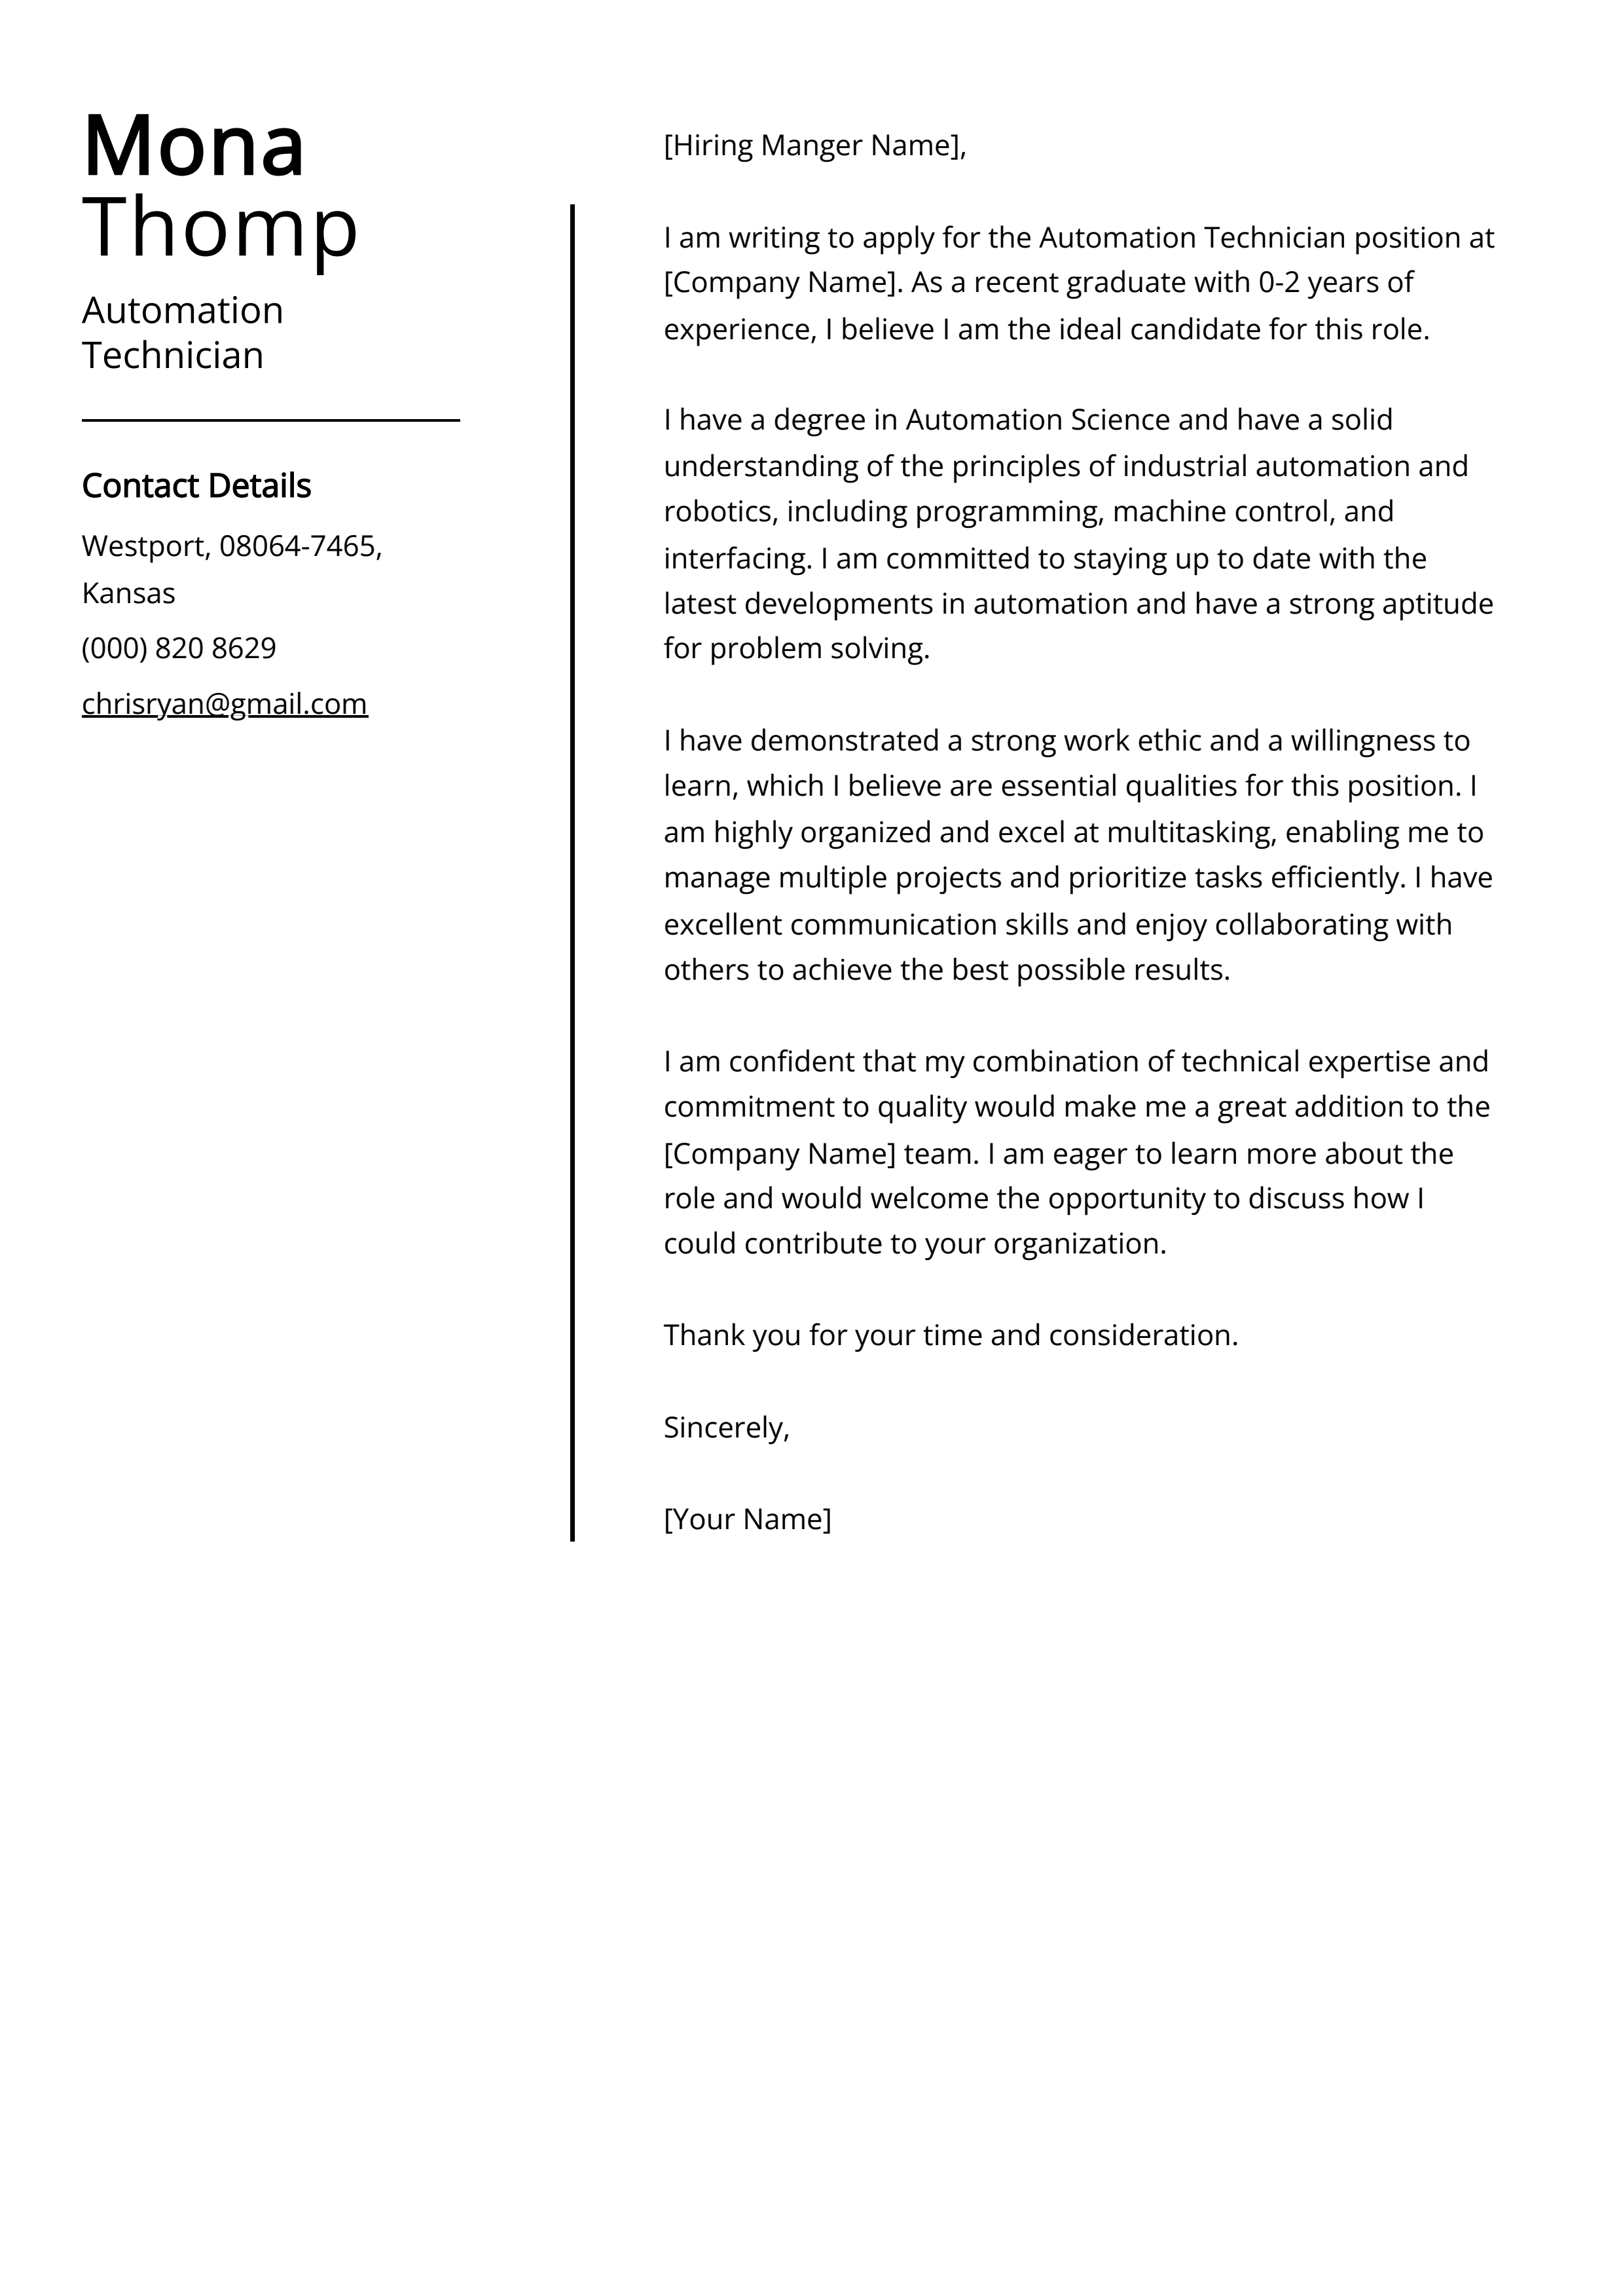 Automation Technician Cover Letter Example